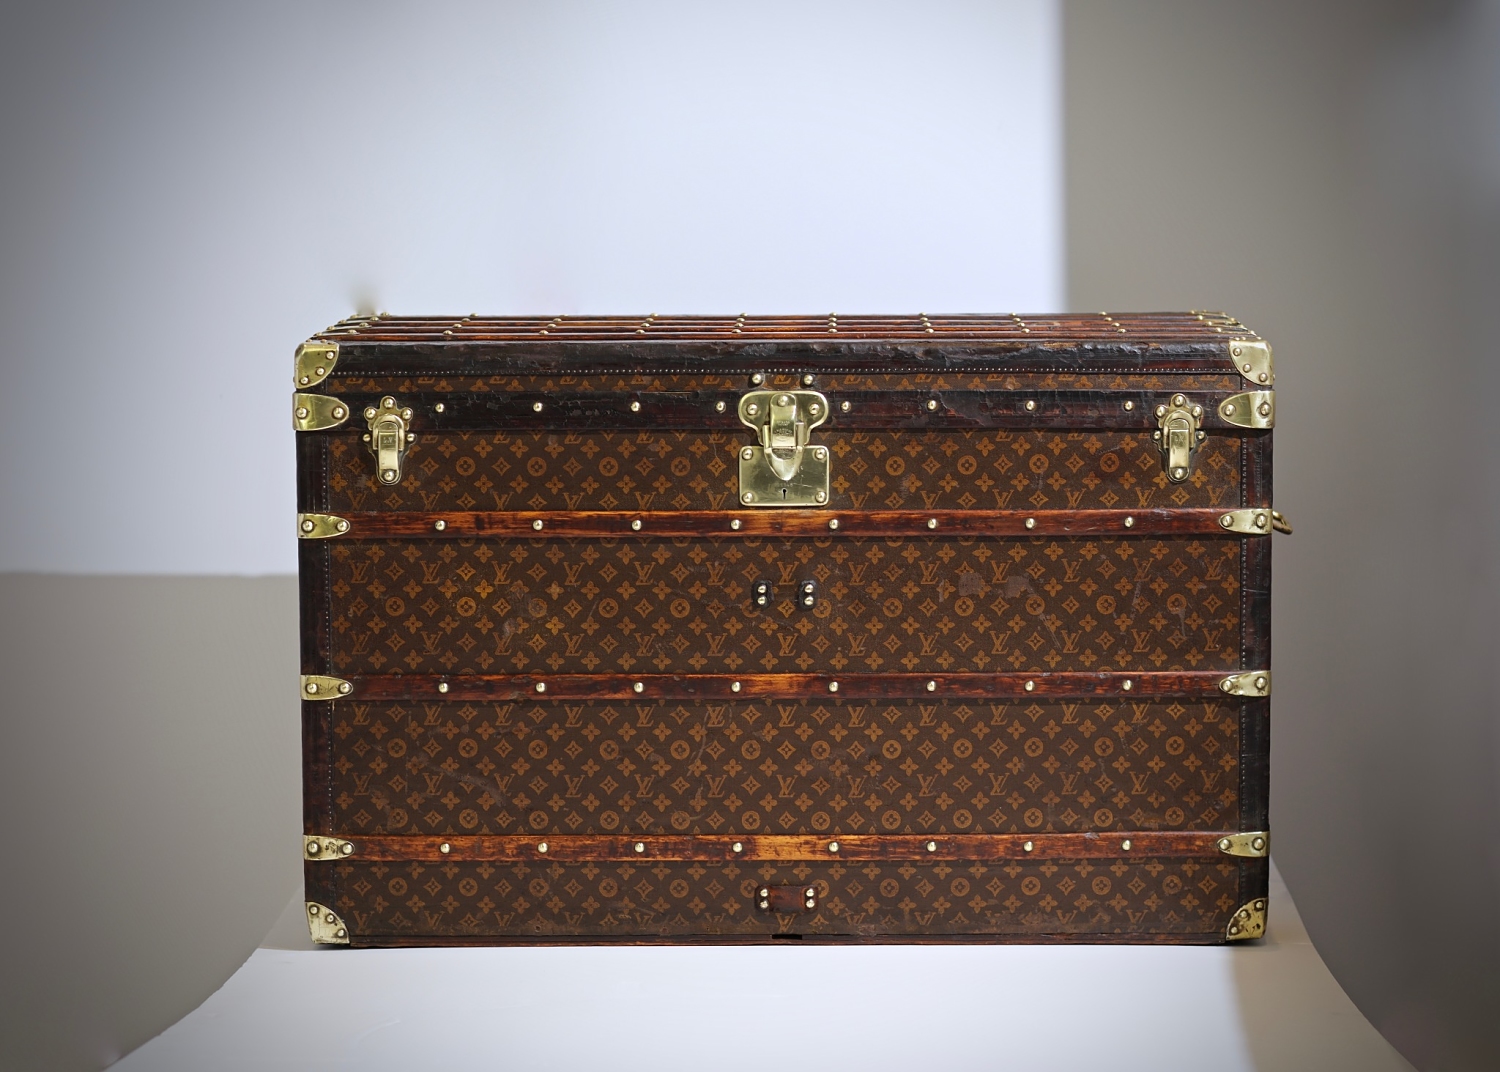 the-well-traveled-trunk-louis-vuitton-thumbnail-product-5663-11